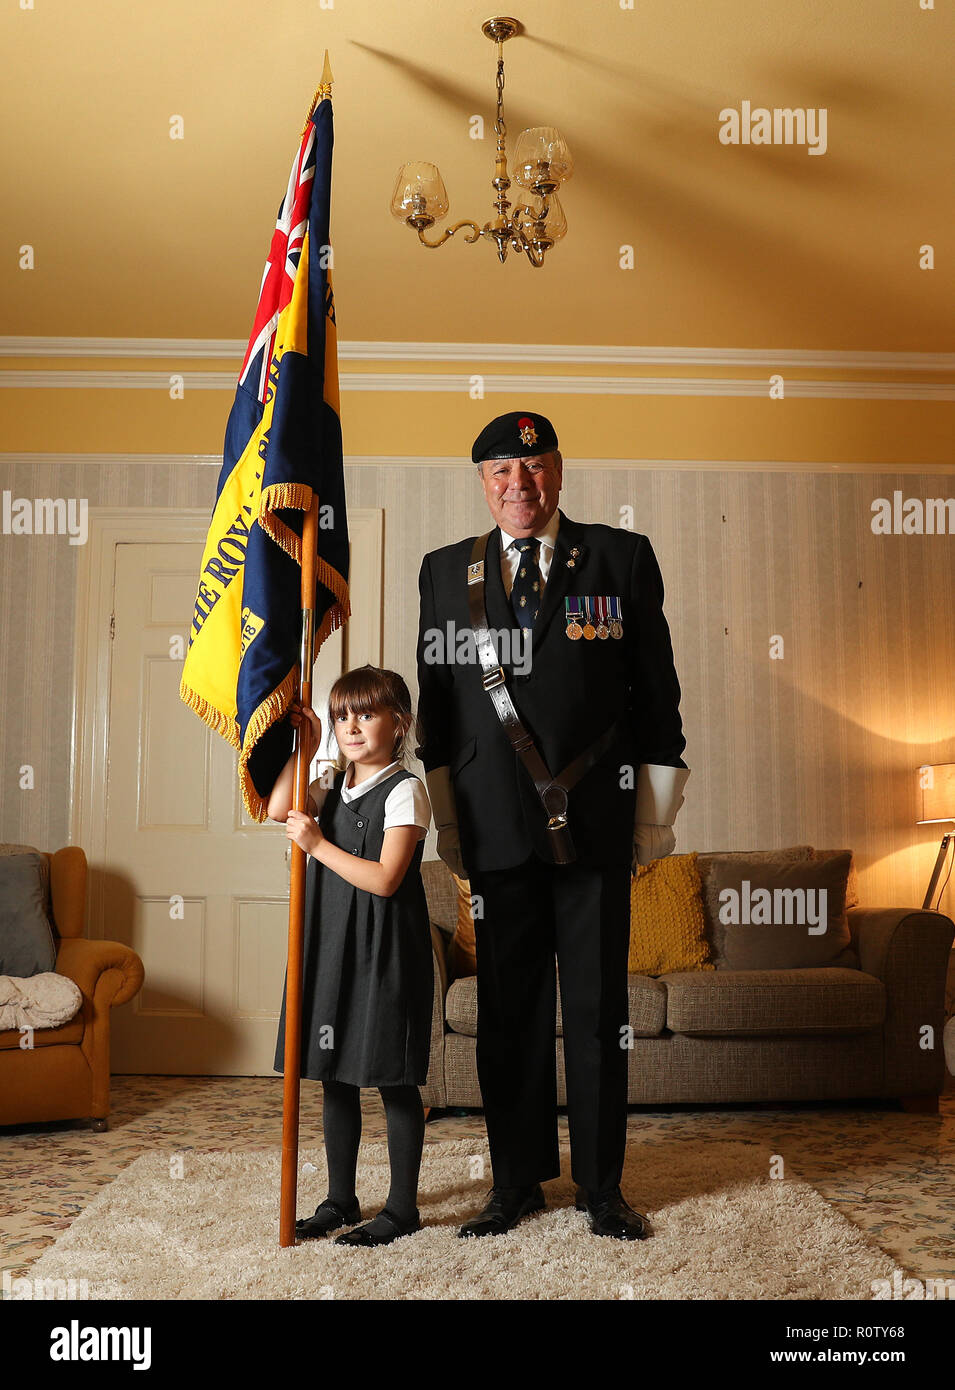 Mollie Stonelake, seven, holds a full-size standard from the Torpoint & District Branch of the Royal British Legion alongside branch chairman Colin Prideaux, in her family home in Torpoint, Cornwall. Mollie went on her first parade aged five and will carry a specially-made miniature standard in a service on Sunday in her home town of Torpoint in Cornwall. Stock Photo